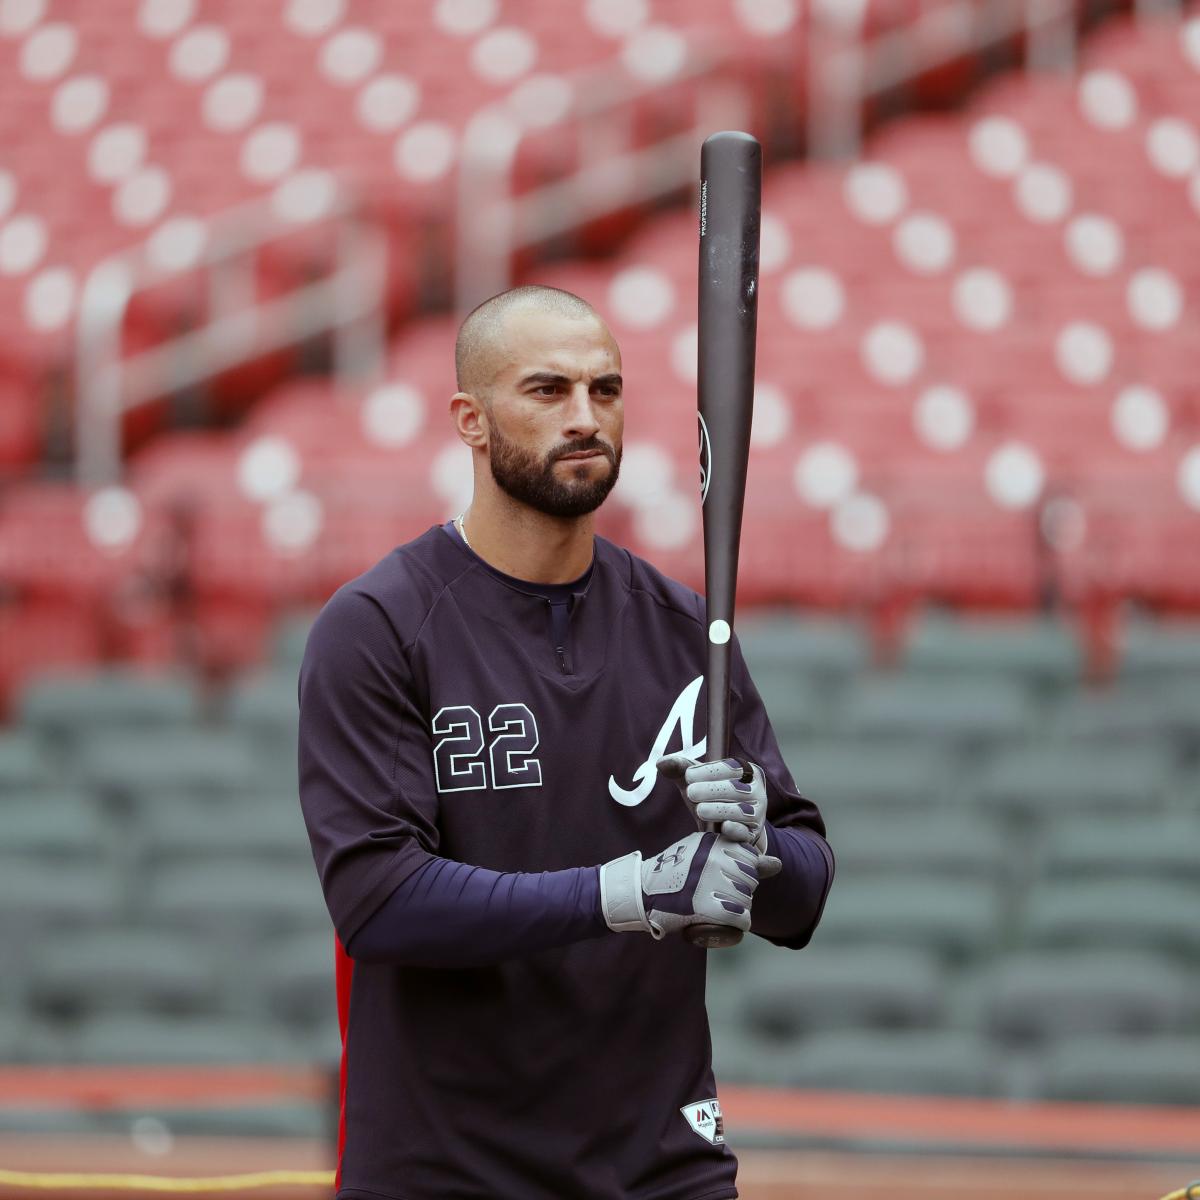 Nick Markakis' sons make the CUTEST sign for Daddy  Atlanta Braves' Nick  Markakis is two hits away from 2,000 in his career - and his sons made some  ADORABLE signs to